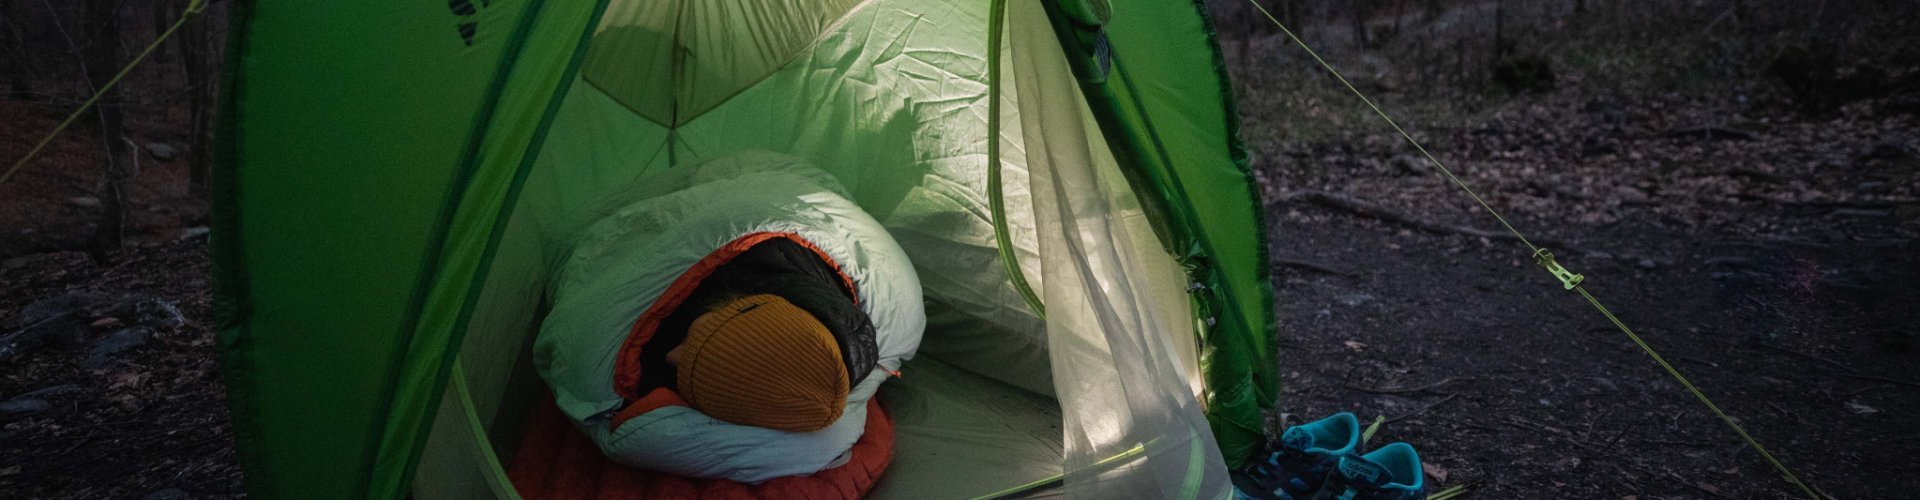 Svenja from bc Product Management lies warmly wrapped in her Deuter sleeping bag in a VAUDE tent.